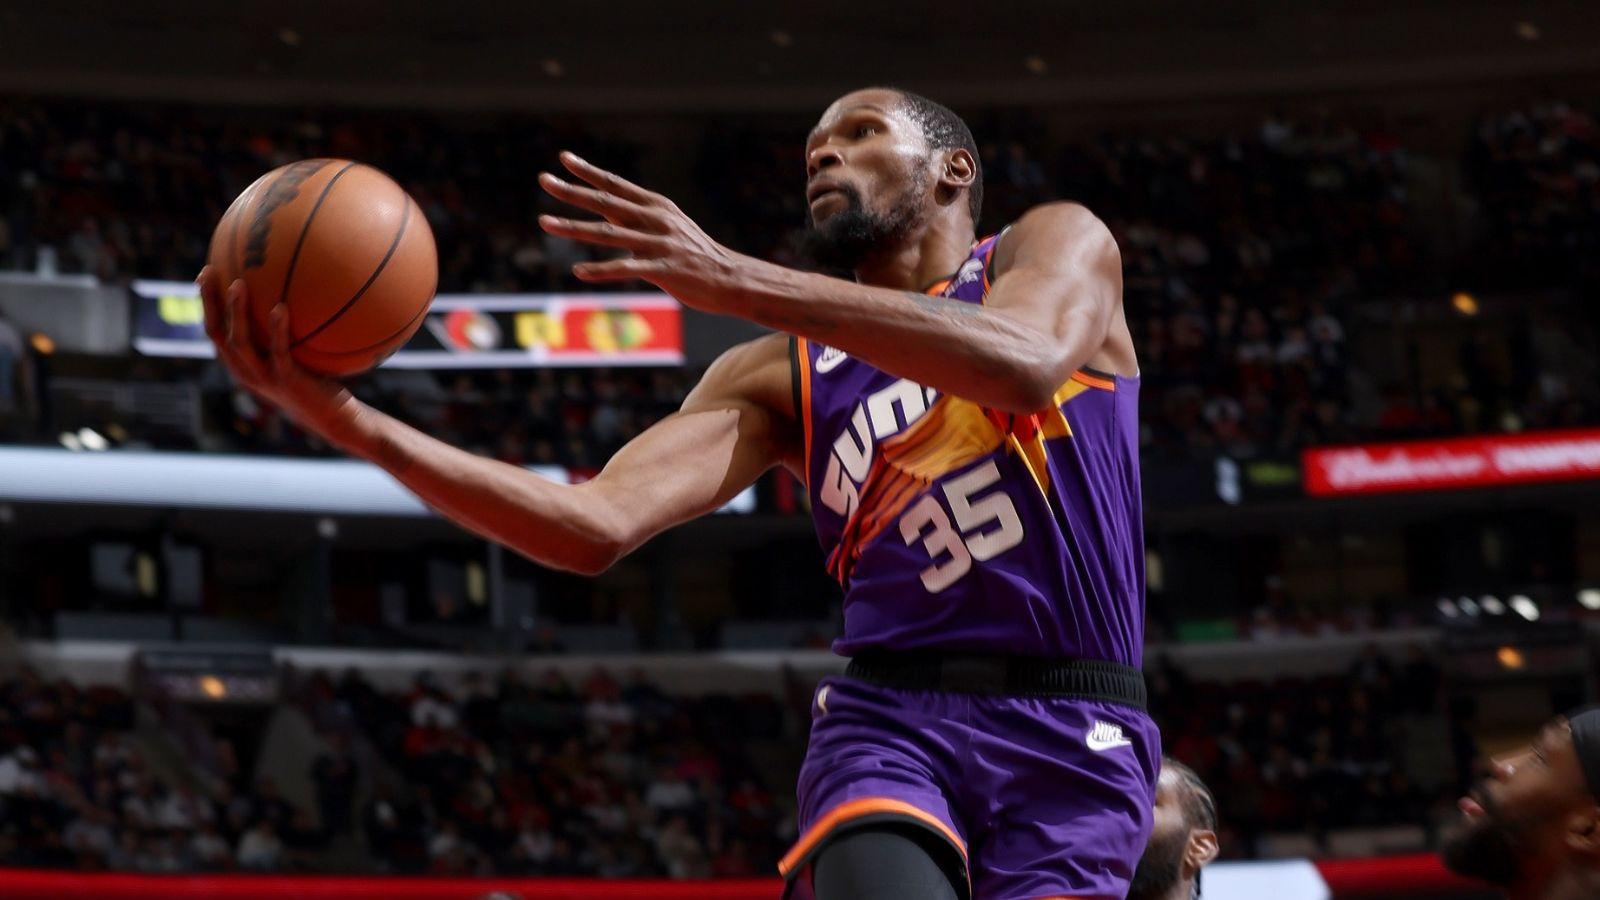 Kevin Durant attempts a field goal as a member of the Phoenix Suns.